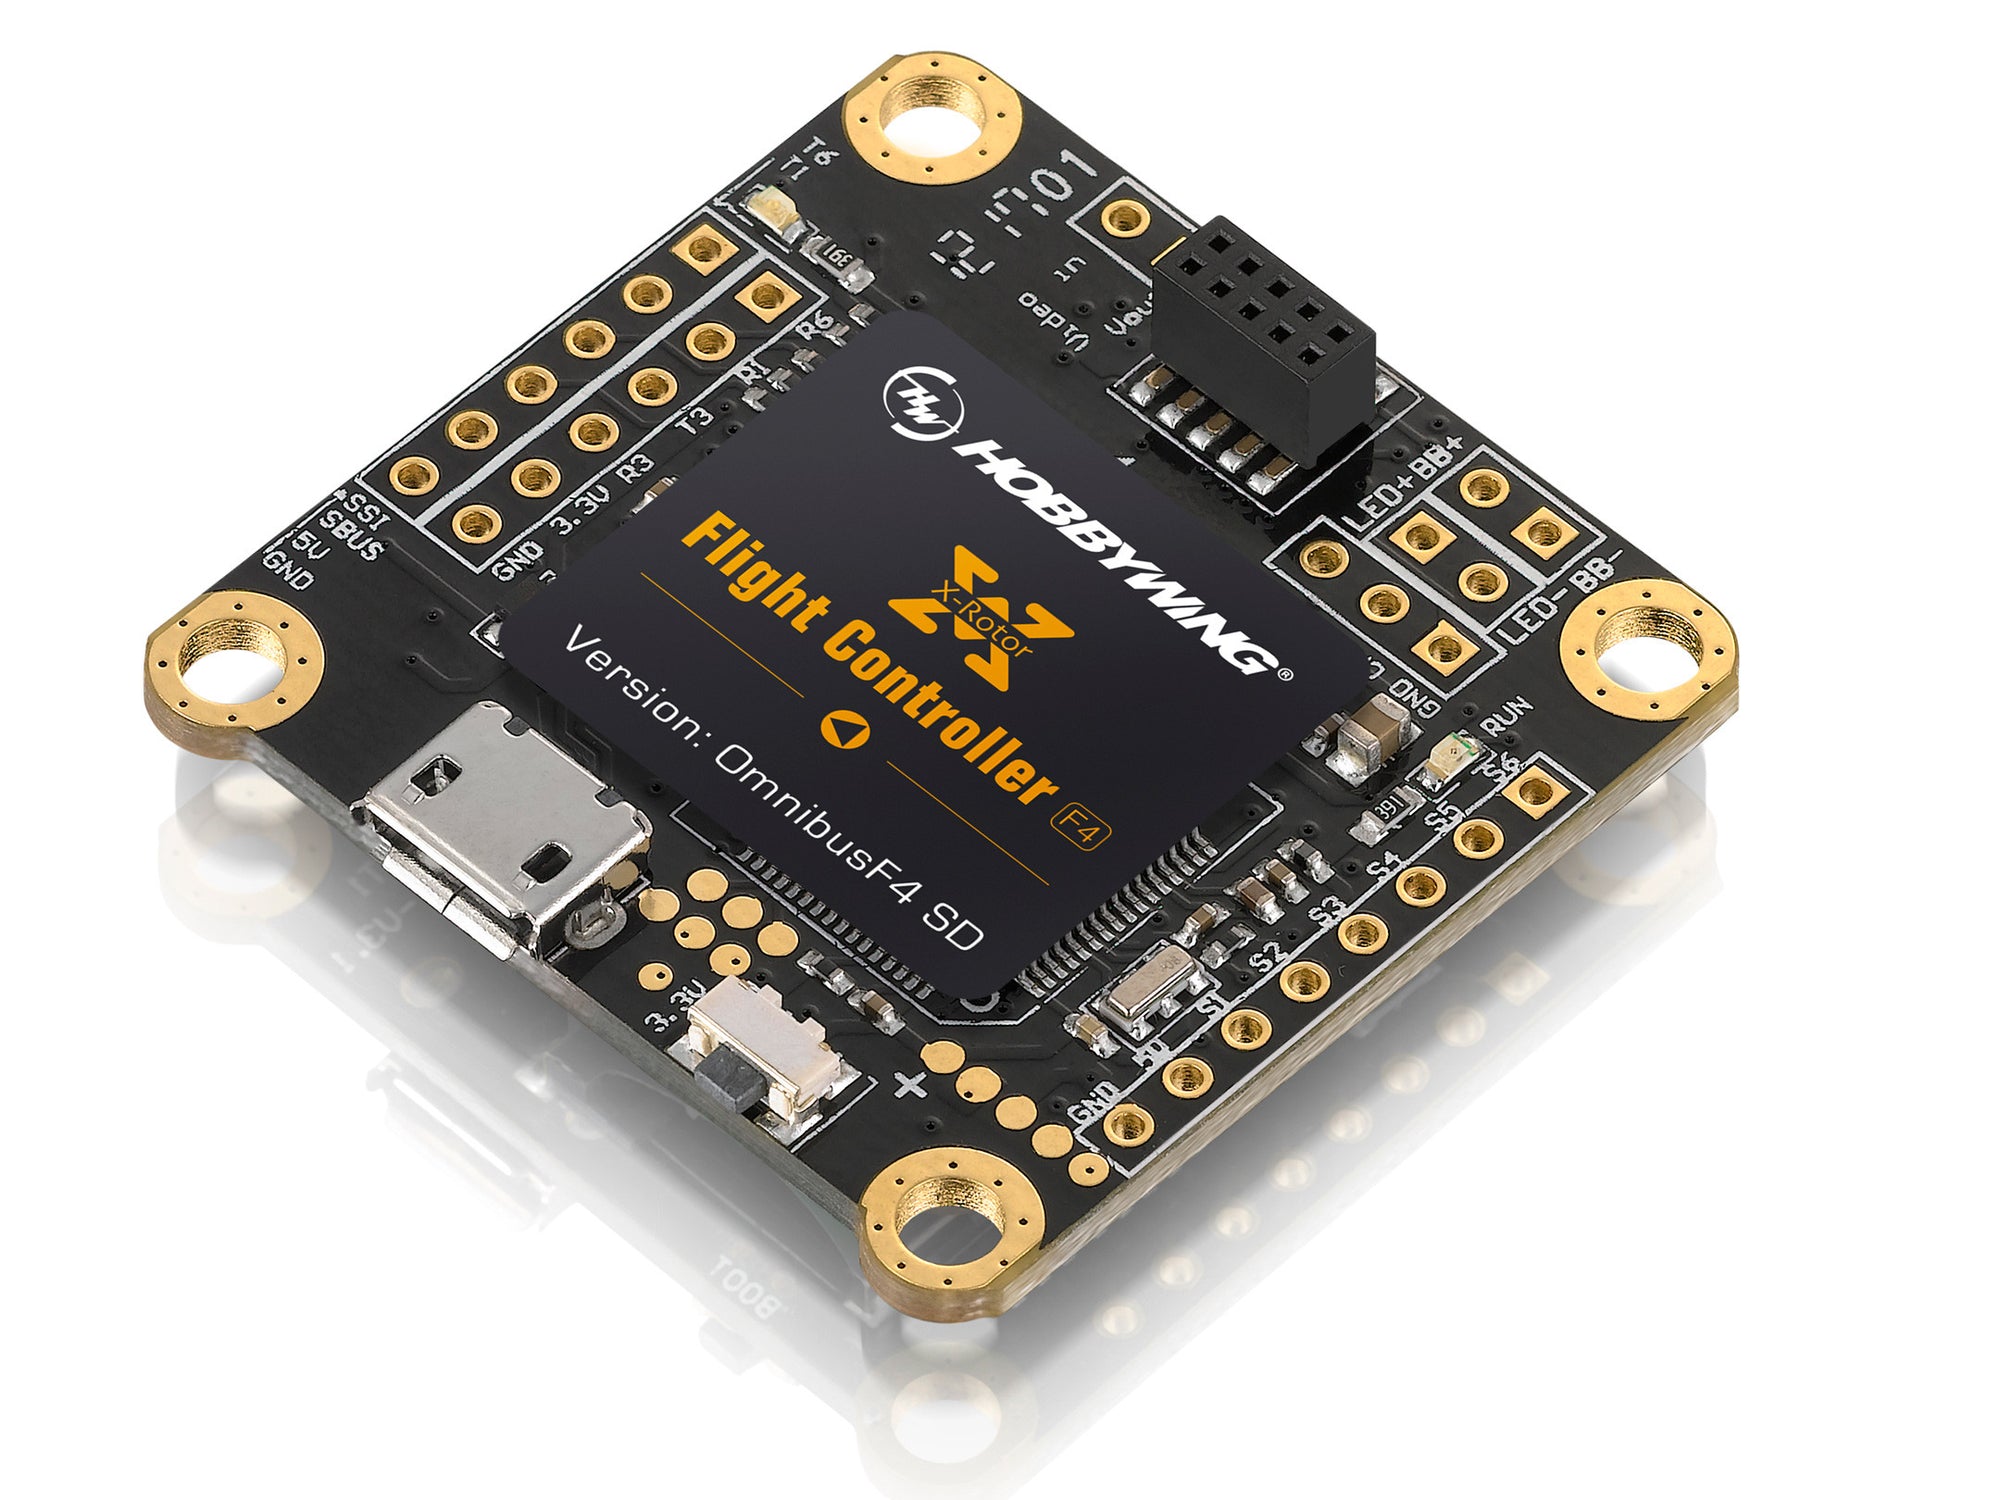 News: HOBBYWING released Flight Controller (FC) for FPV Drone "serious" racers